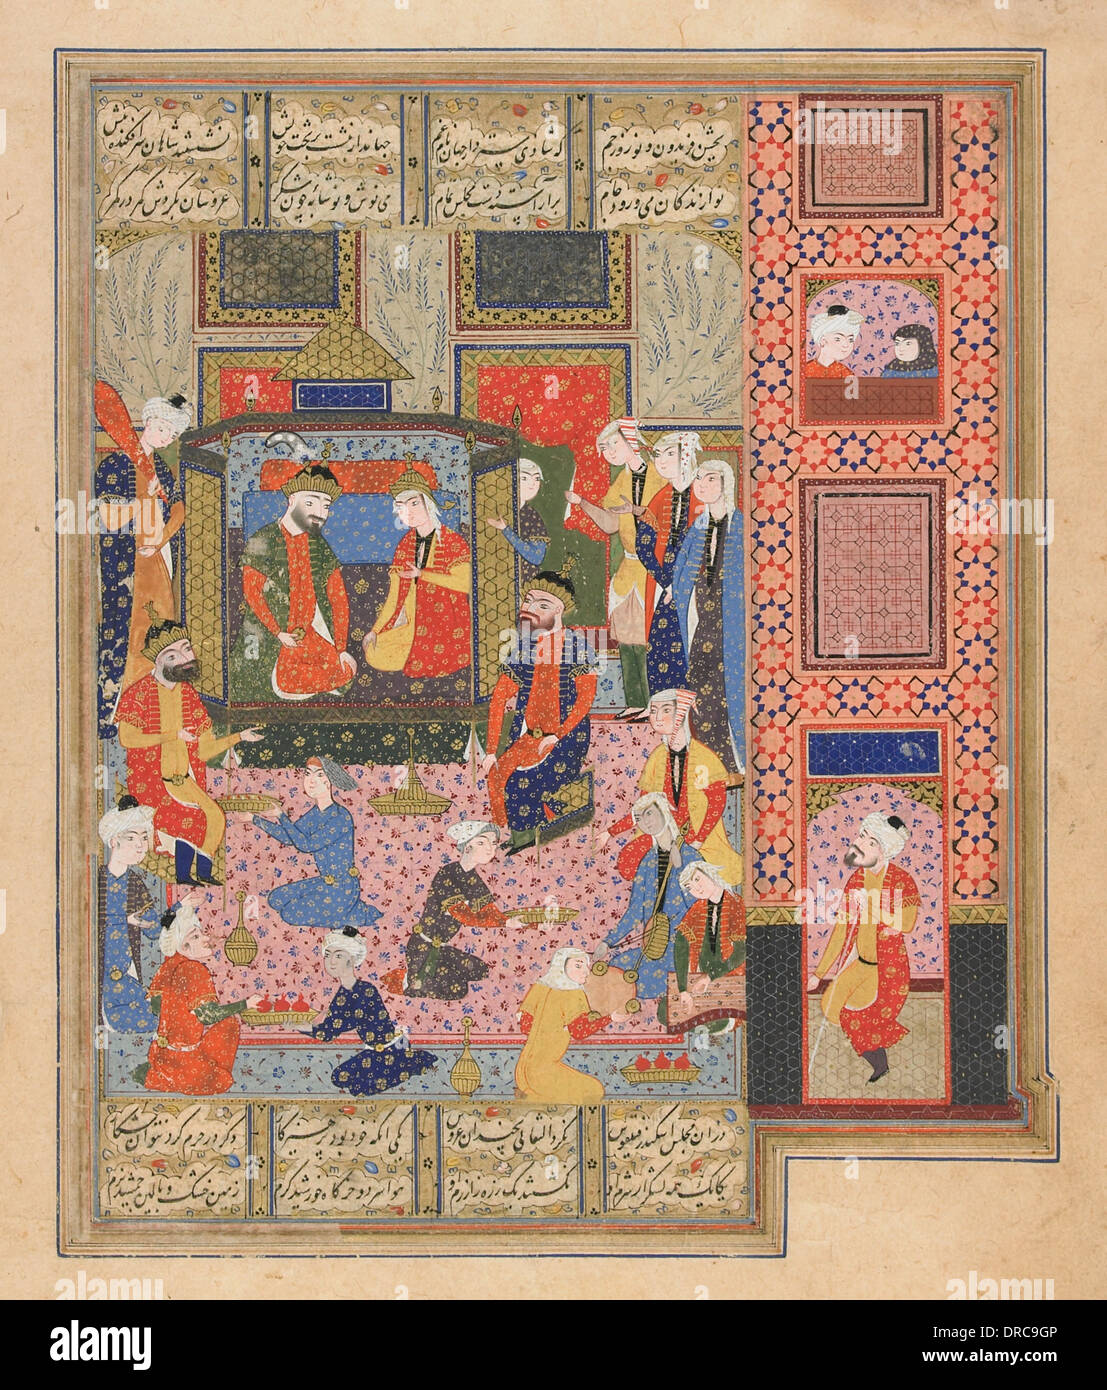 Painting depicting the feast of Iskandar and Nushabah from Nizami Ganjavi's (1141-1209) 'Iskandarnamah' (The Book of Alexander the Great). 16th Century Persian manuscript. On his way to the Land of Darkness Alexander visits the queen of Barda, Nushabah, she organizes an 'ishrat (large feast) for him and invites him to sit next to her on a golden throne. Servants and musicians surround the couple. Illustration from Nizami Ganjavi's 'Iskandarnamah' (The Book of Alexander the Great)16th Century manuscript. Stock Photo